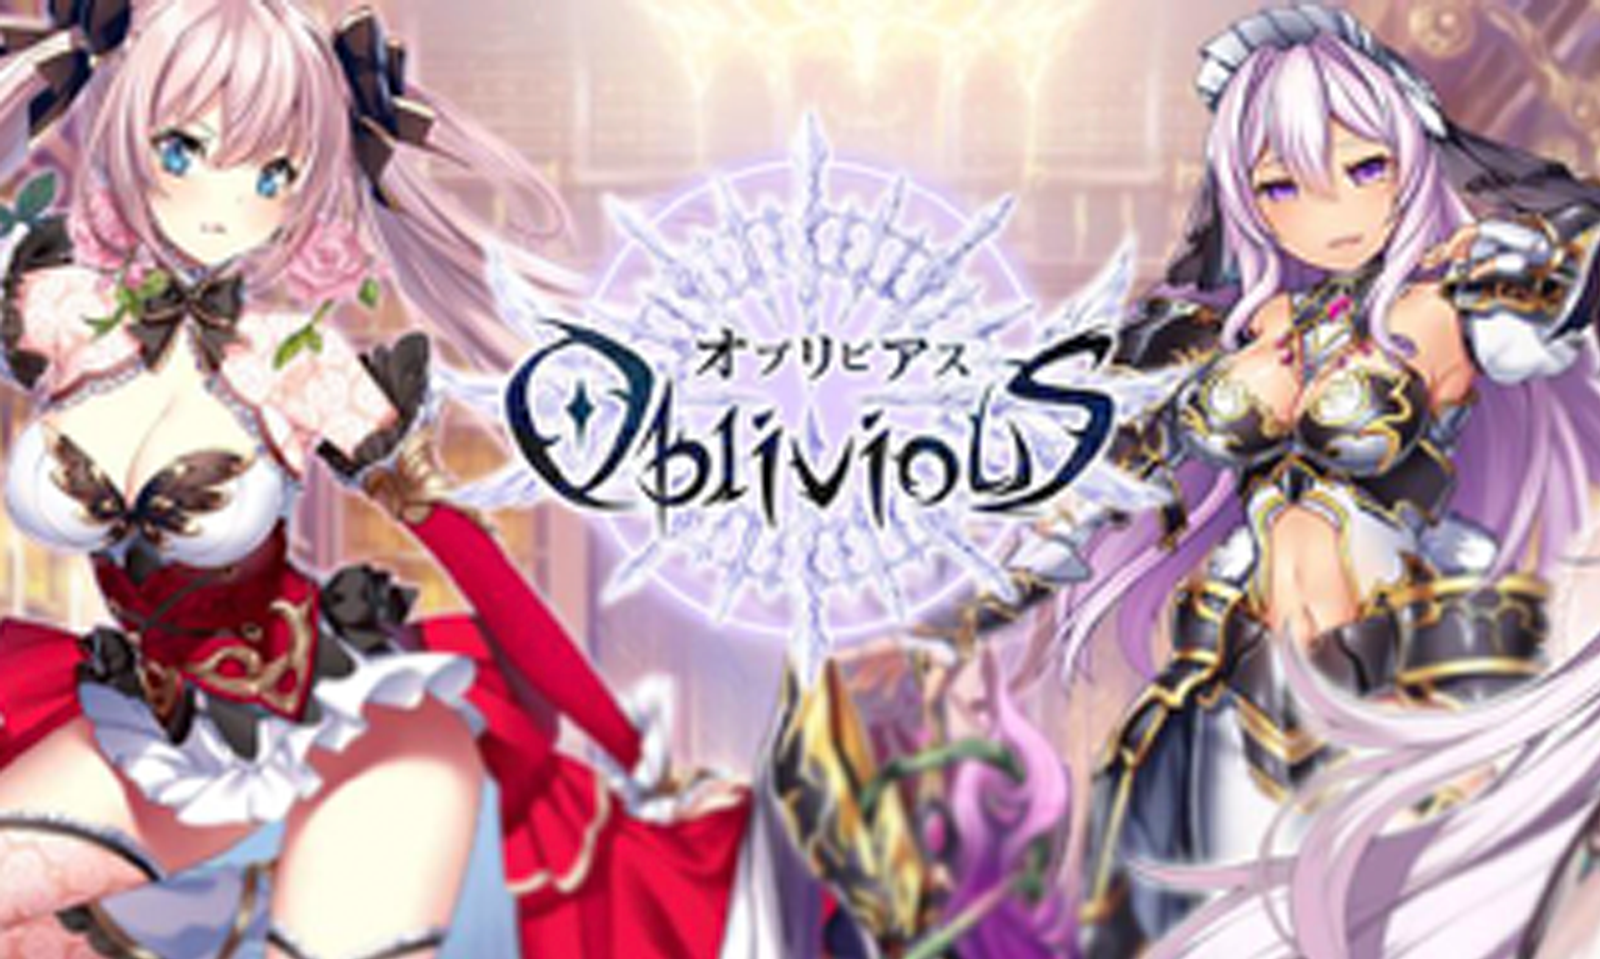 Nutaku Launches 'Oblivious X' Action Adventure Game